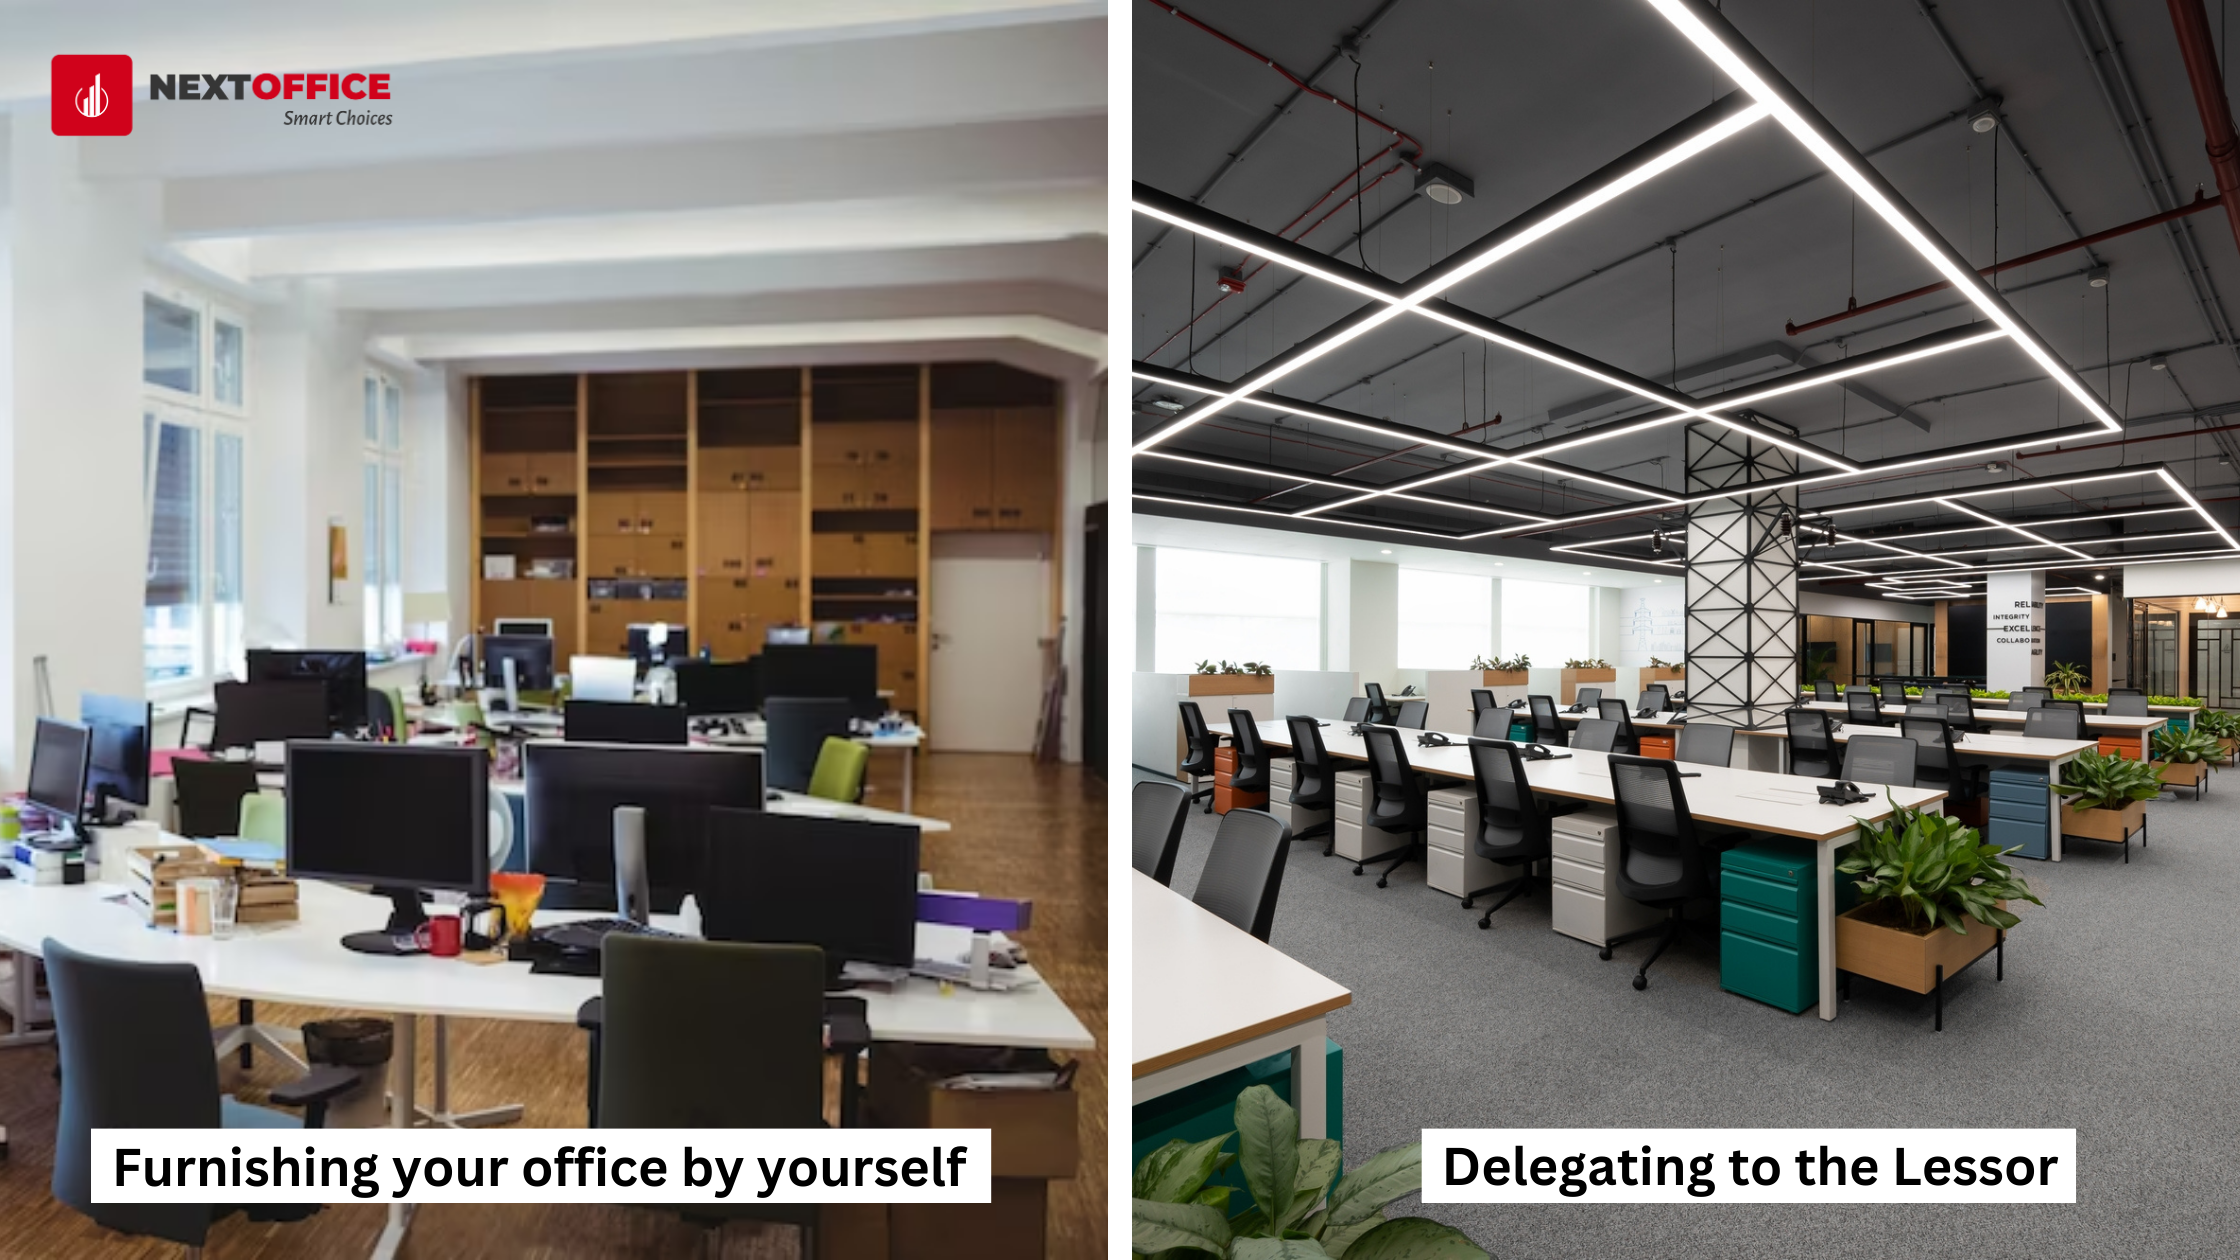 Office Furnishing Dilemma: To Invest or Delegate to the Lessor?